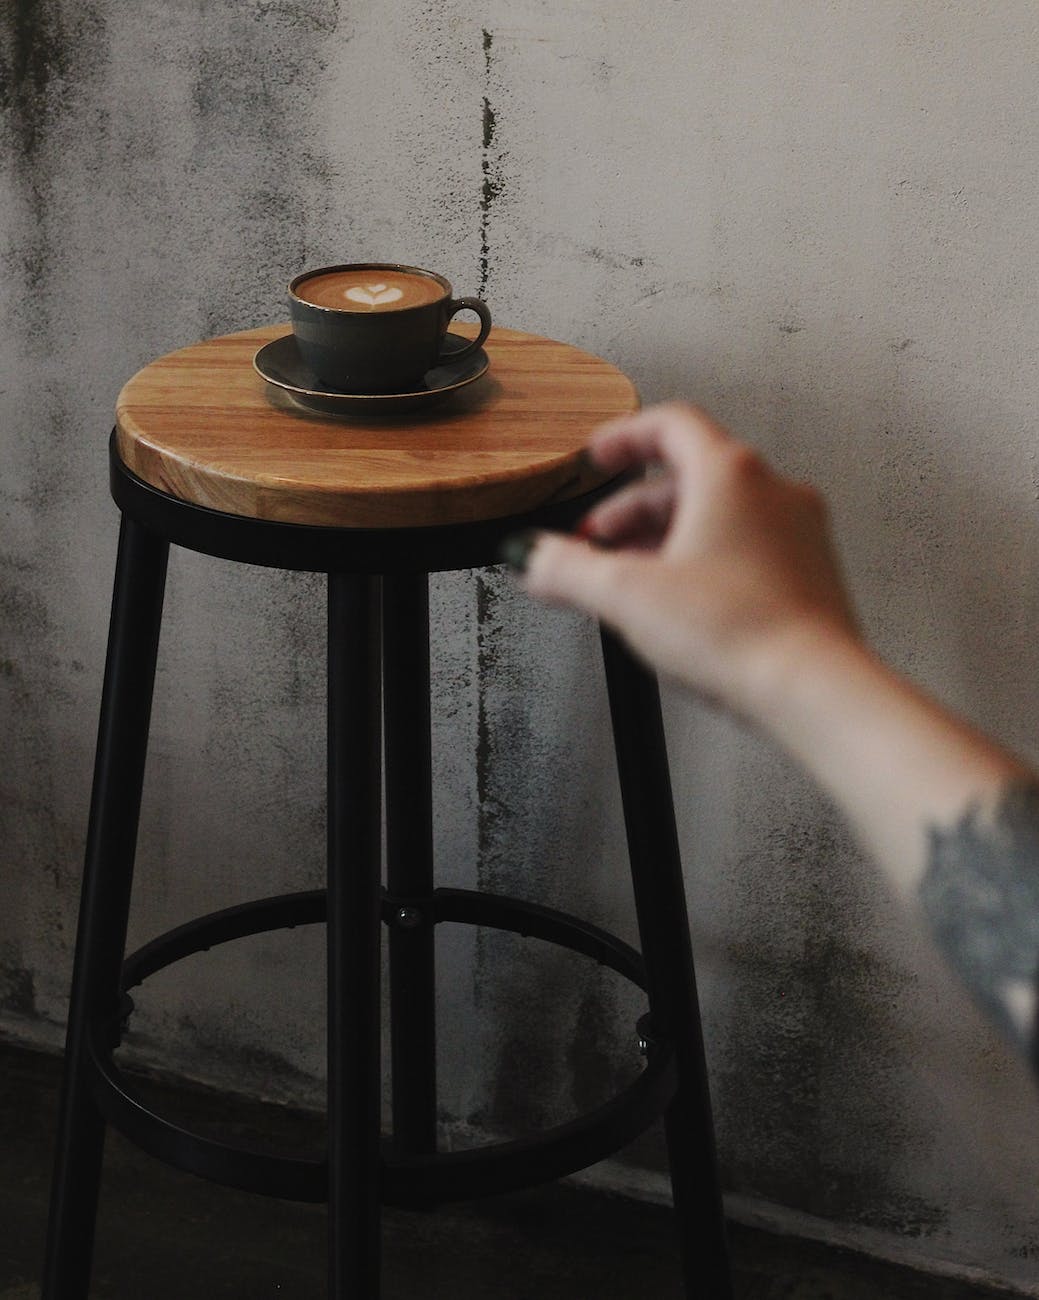 A craving hand reaching for a black ceramic coffee mug containing a latte and sitting on a stool.